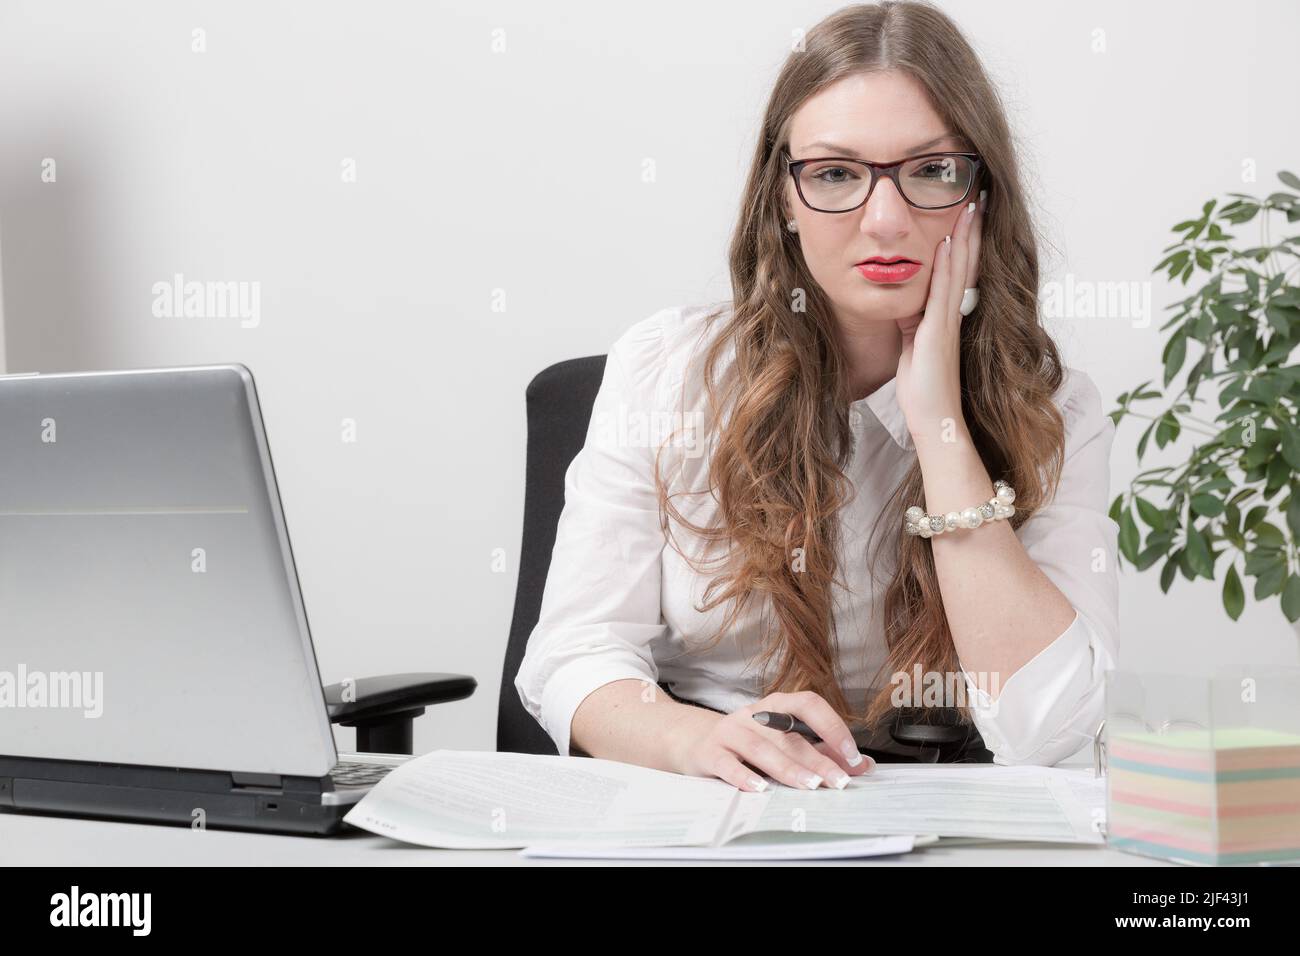 young business woman is working with computer and papers at desk Stock Photo